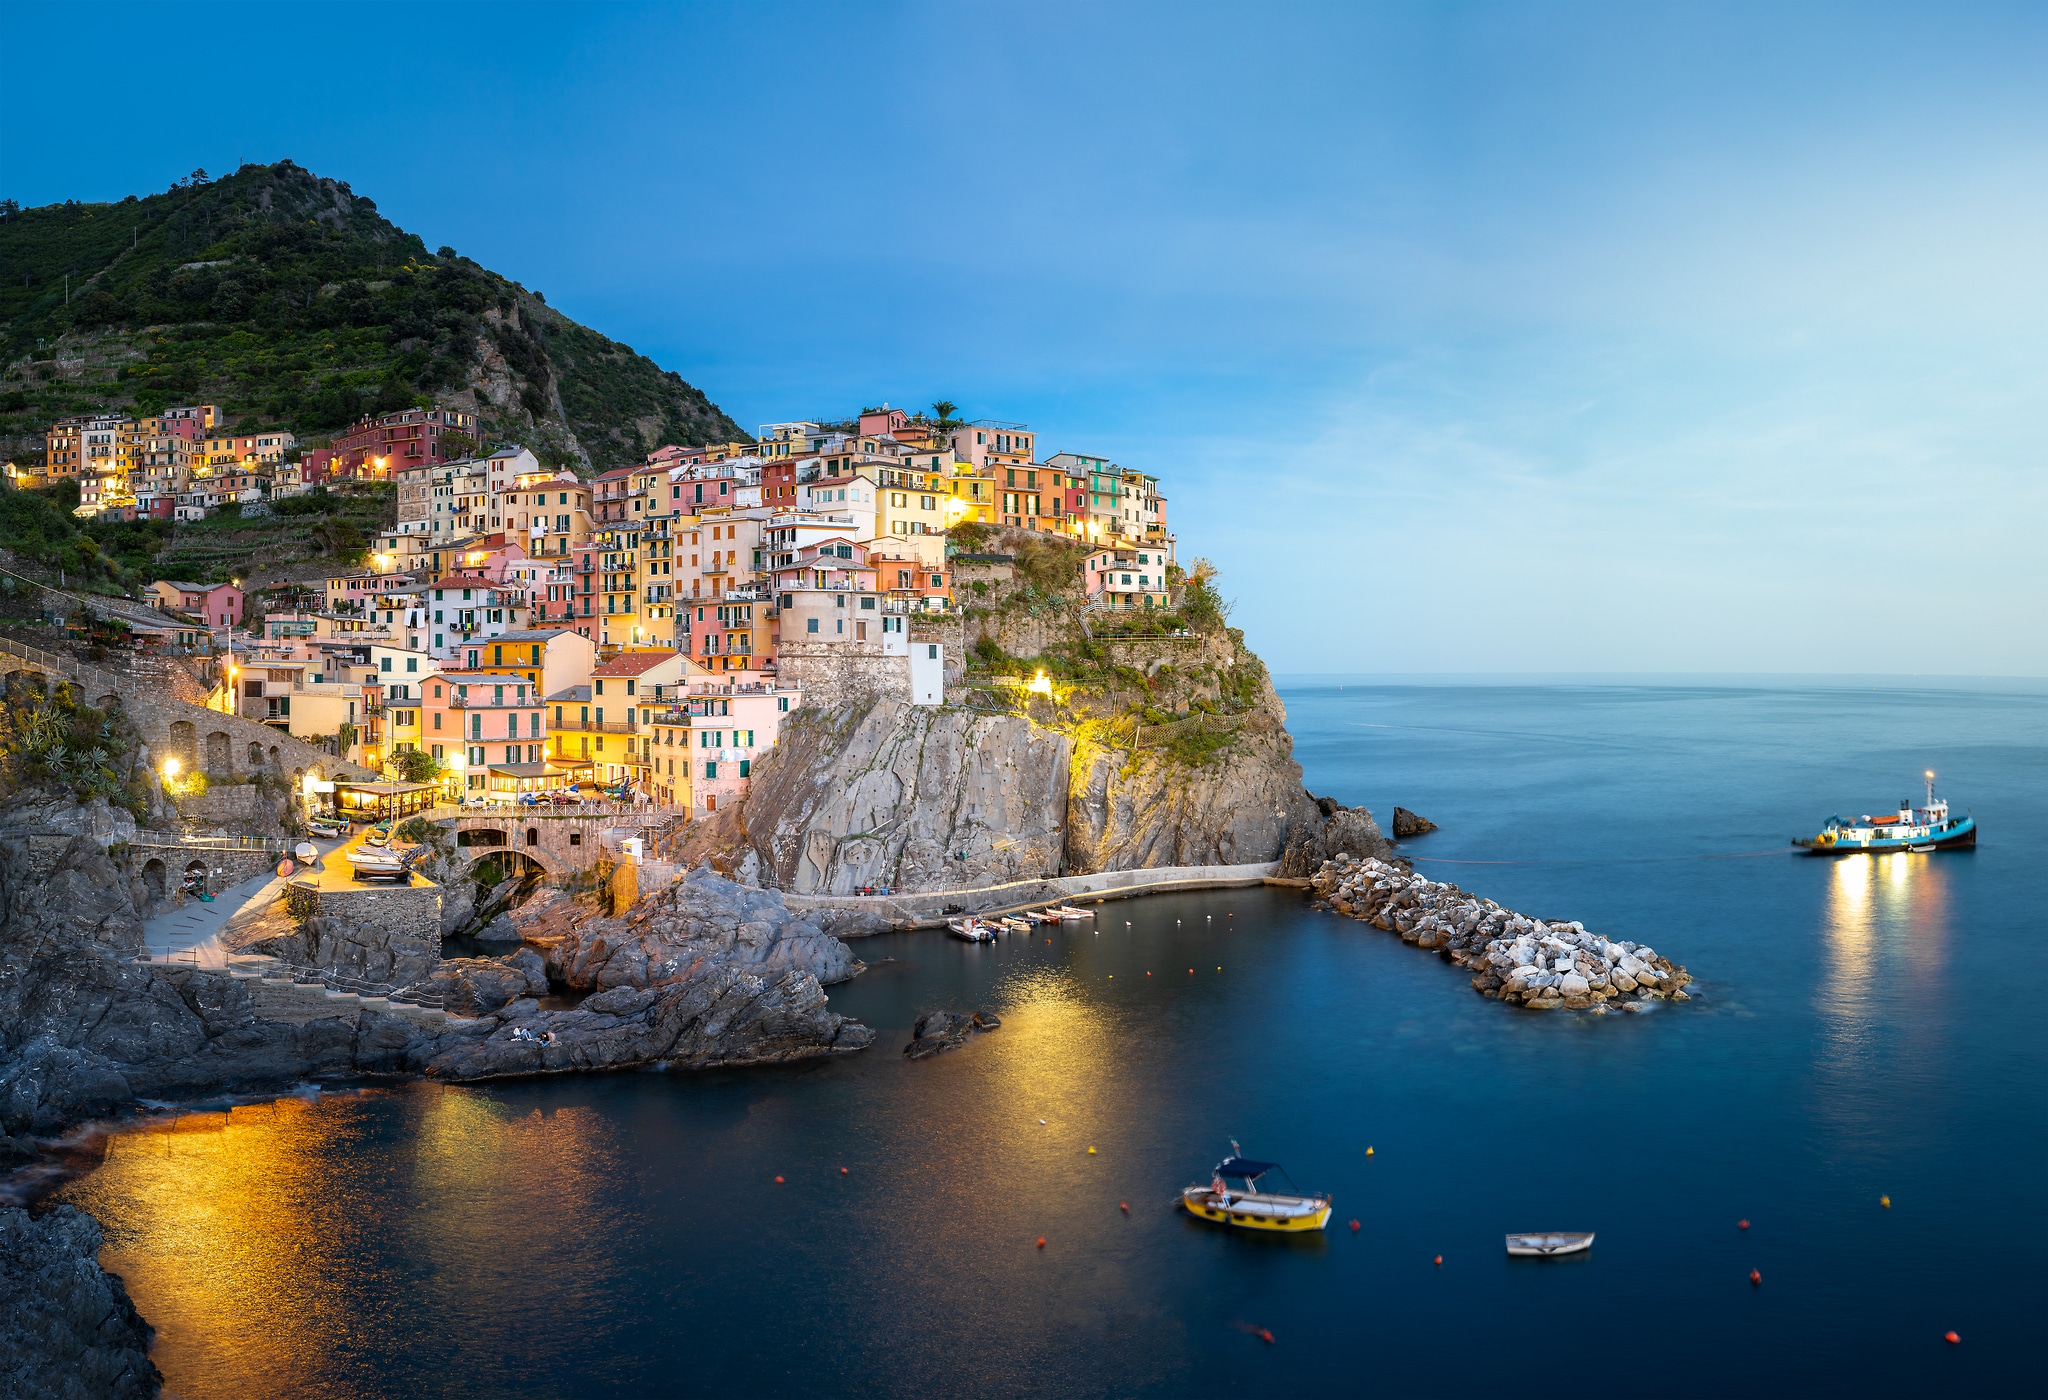 352 megapixels! A very high resolution, large-format art photo print of the coast of Italy at dusk with houses on rocky cliffs next to the Mediterranean Sea; seascape photograph created by Justin Katz in Manarola, Cinque Terre, Italy